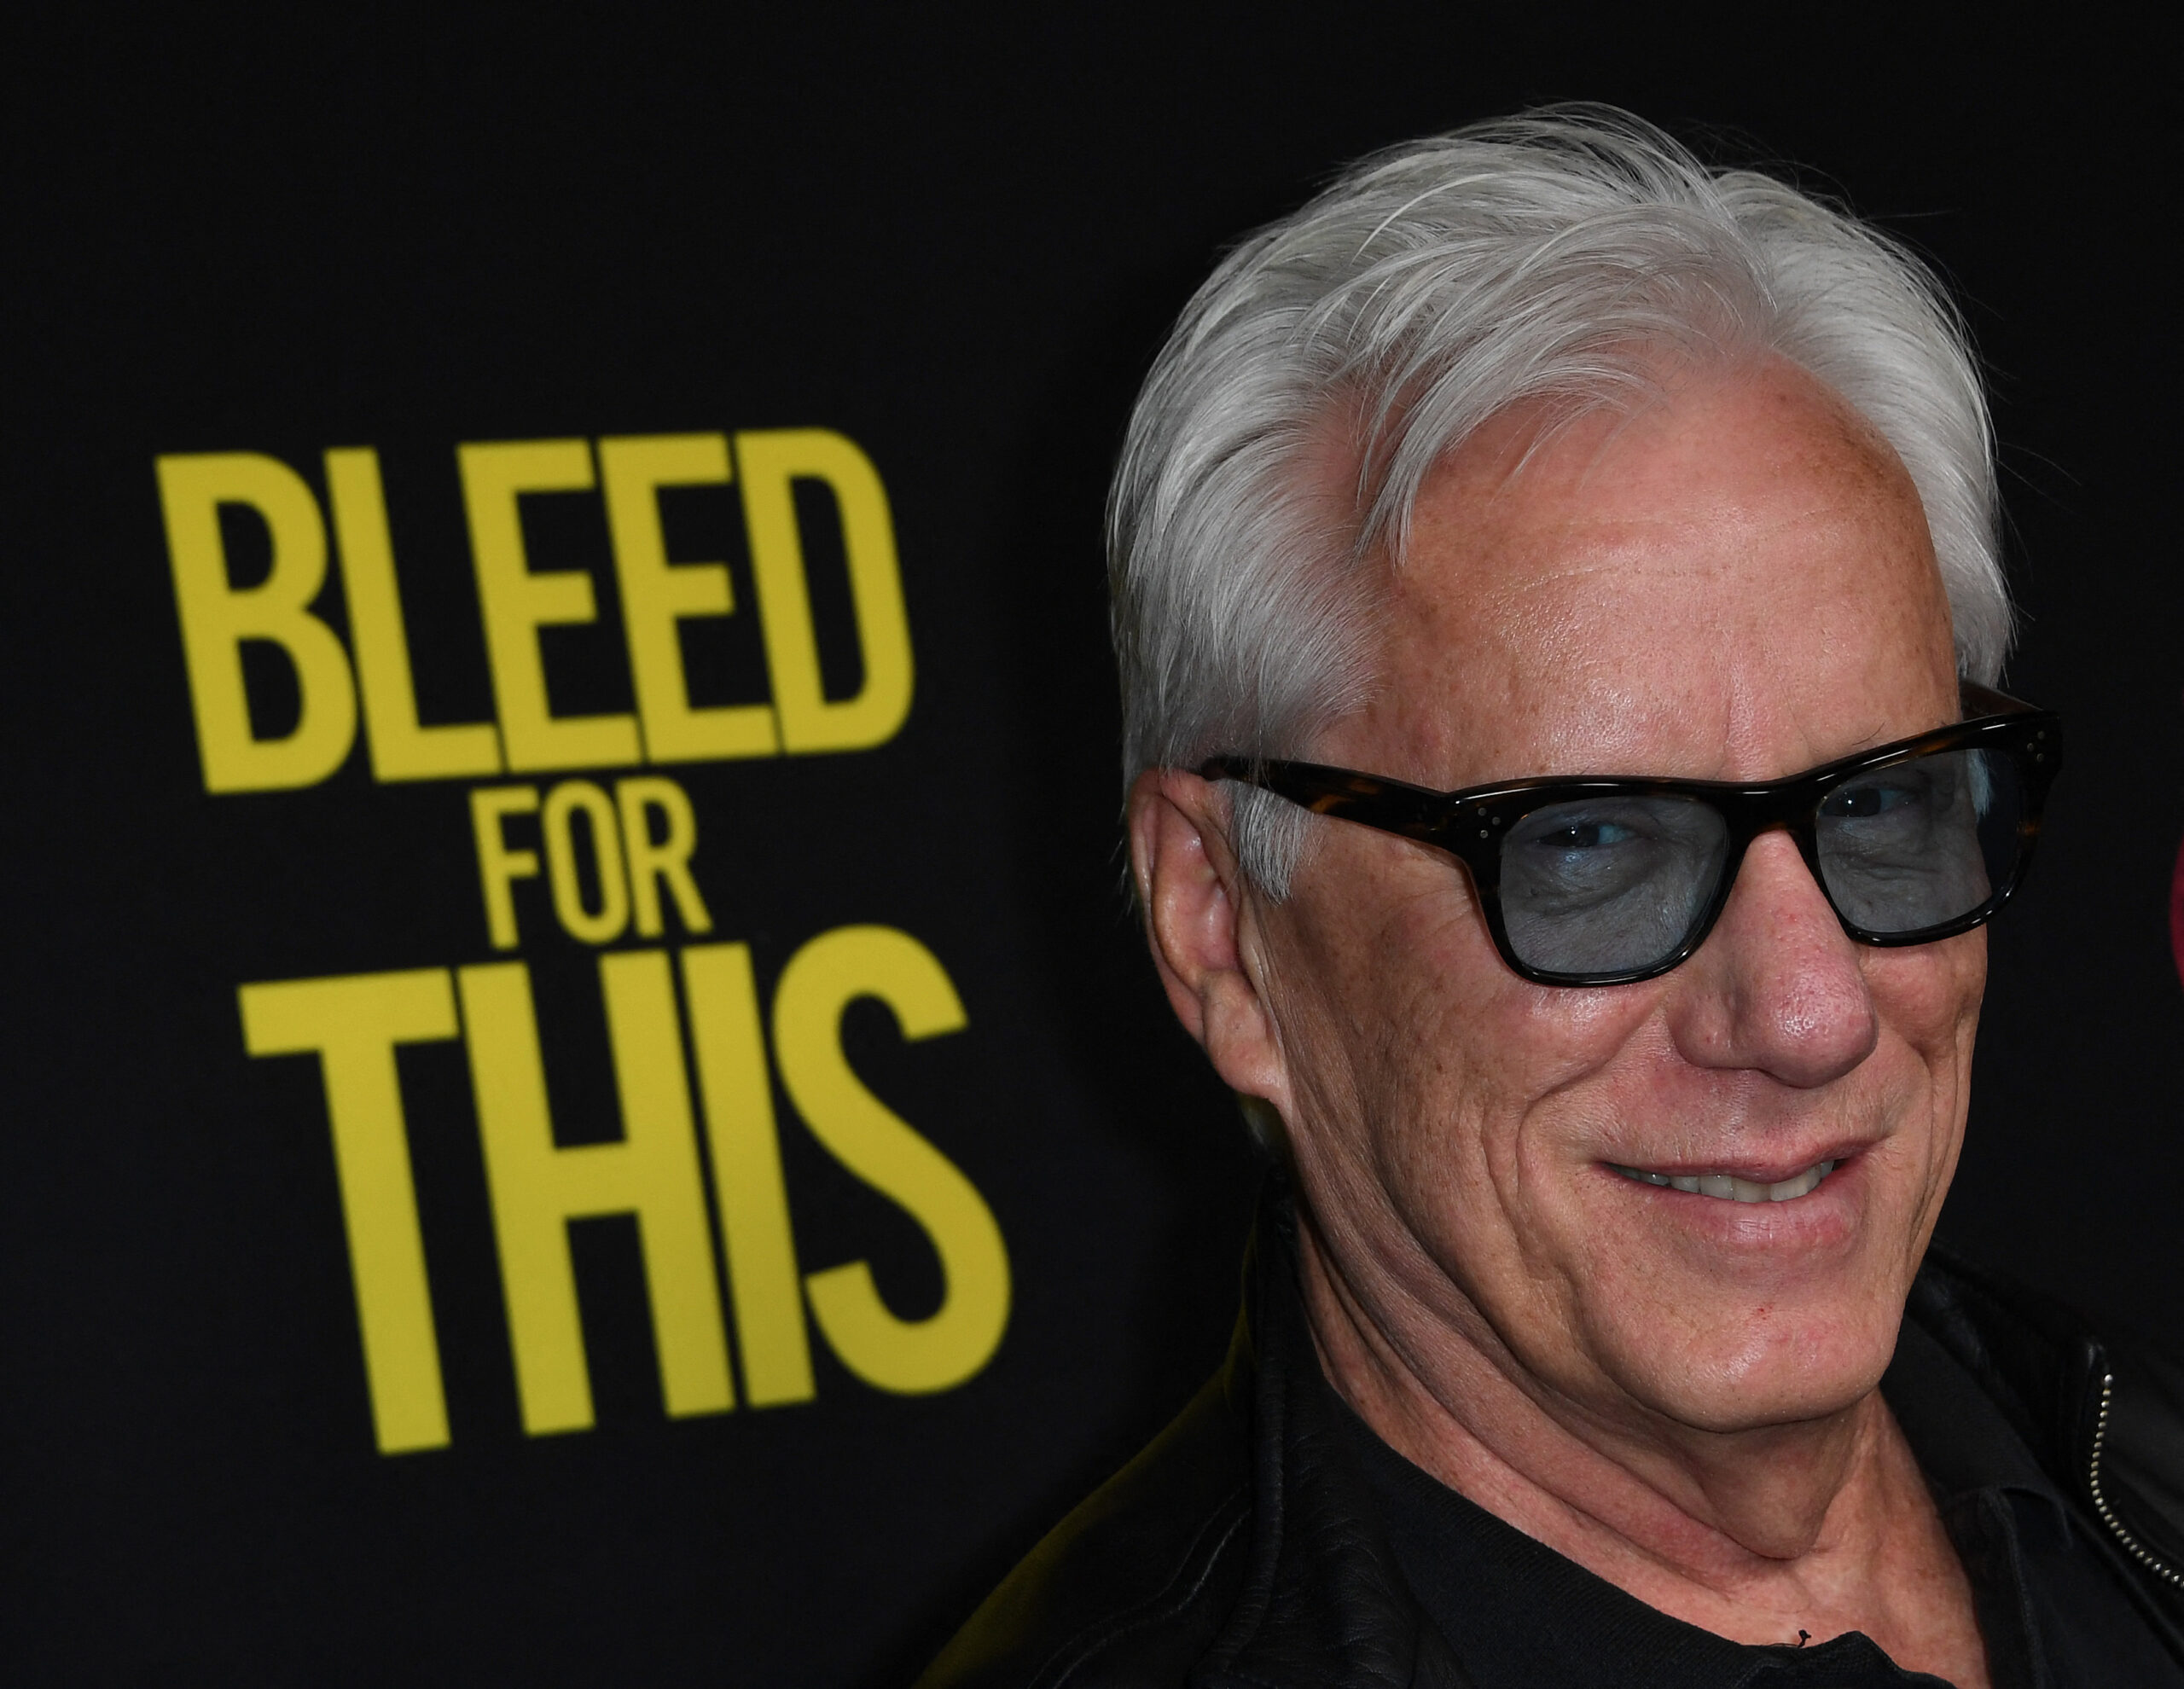 Of Course Youre Scared James Woods Mocks New York Times For Calling New GOP Rep Flores Far-Right Latina